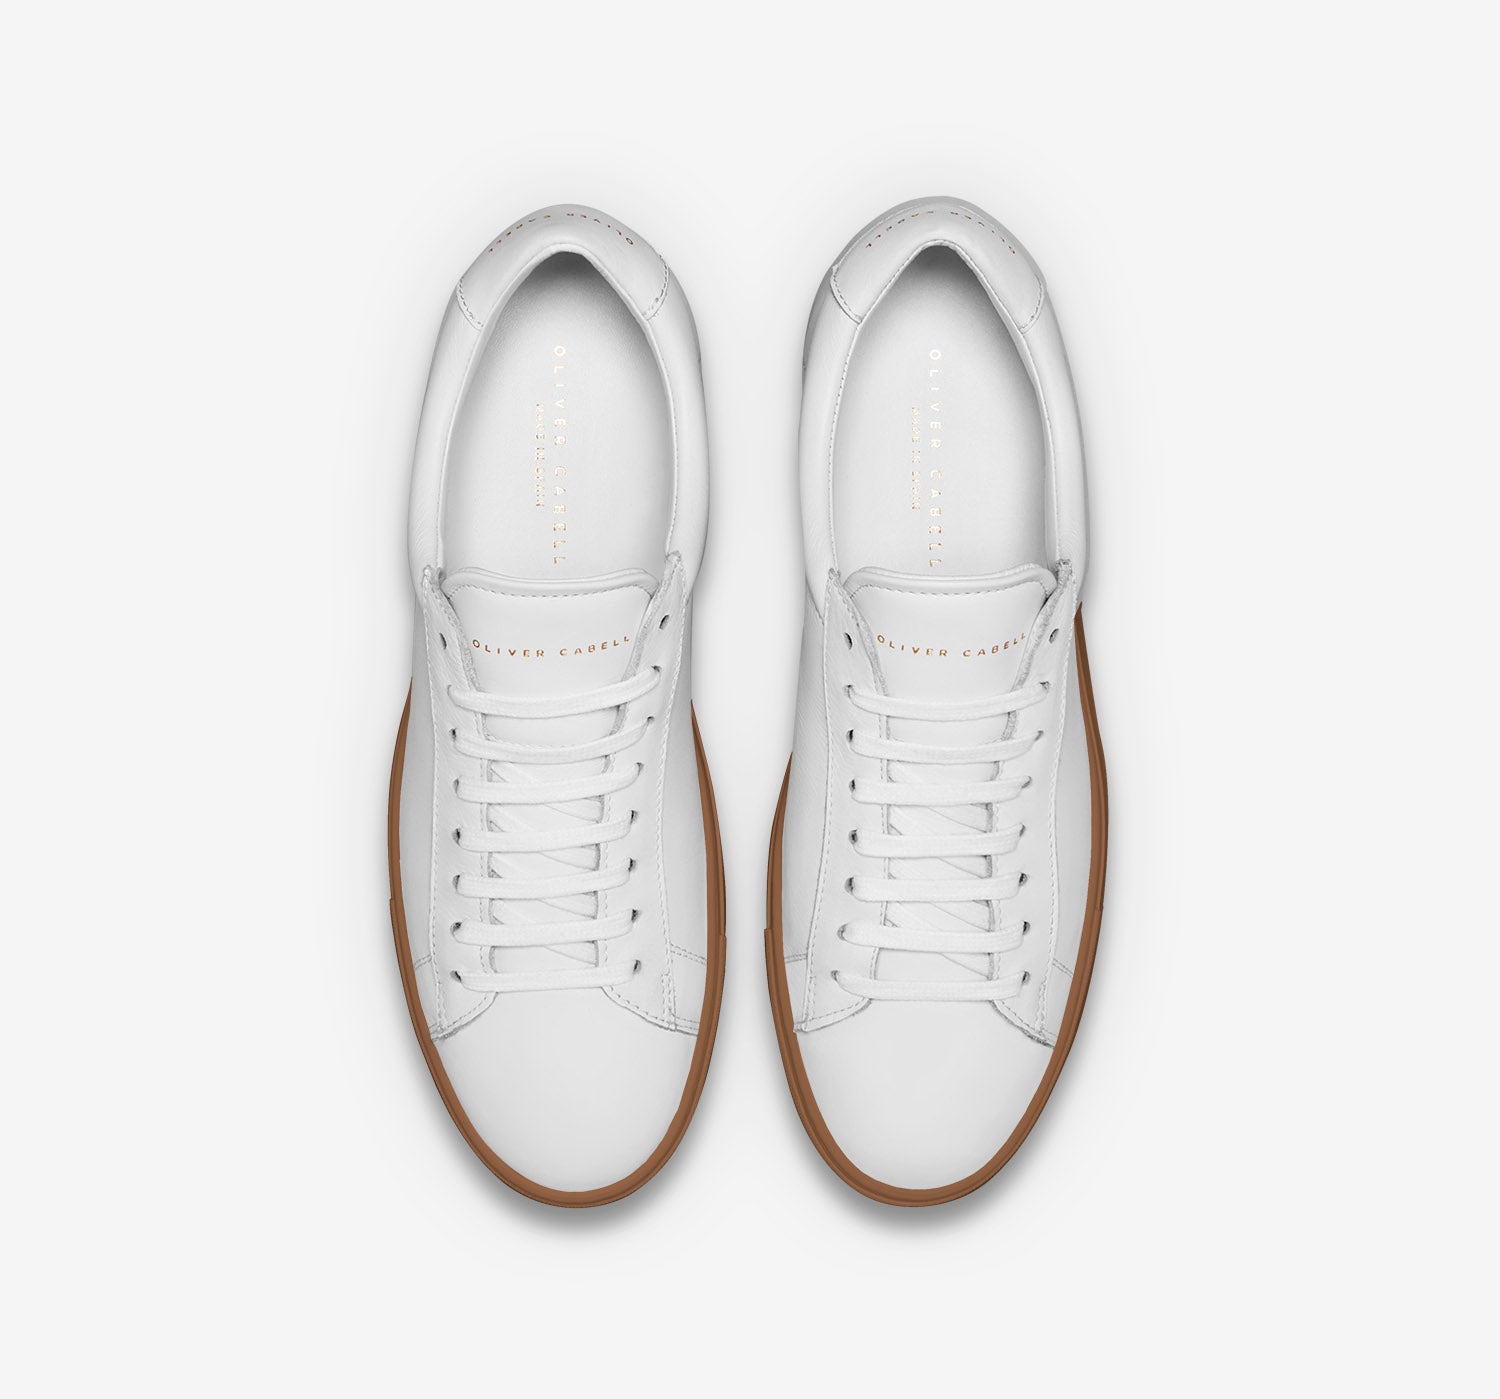 Low 1 | White Gum - Oliver Cabell